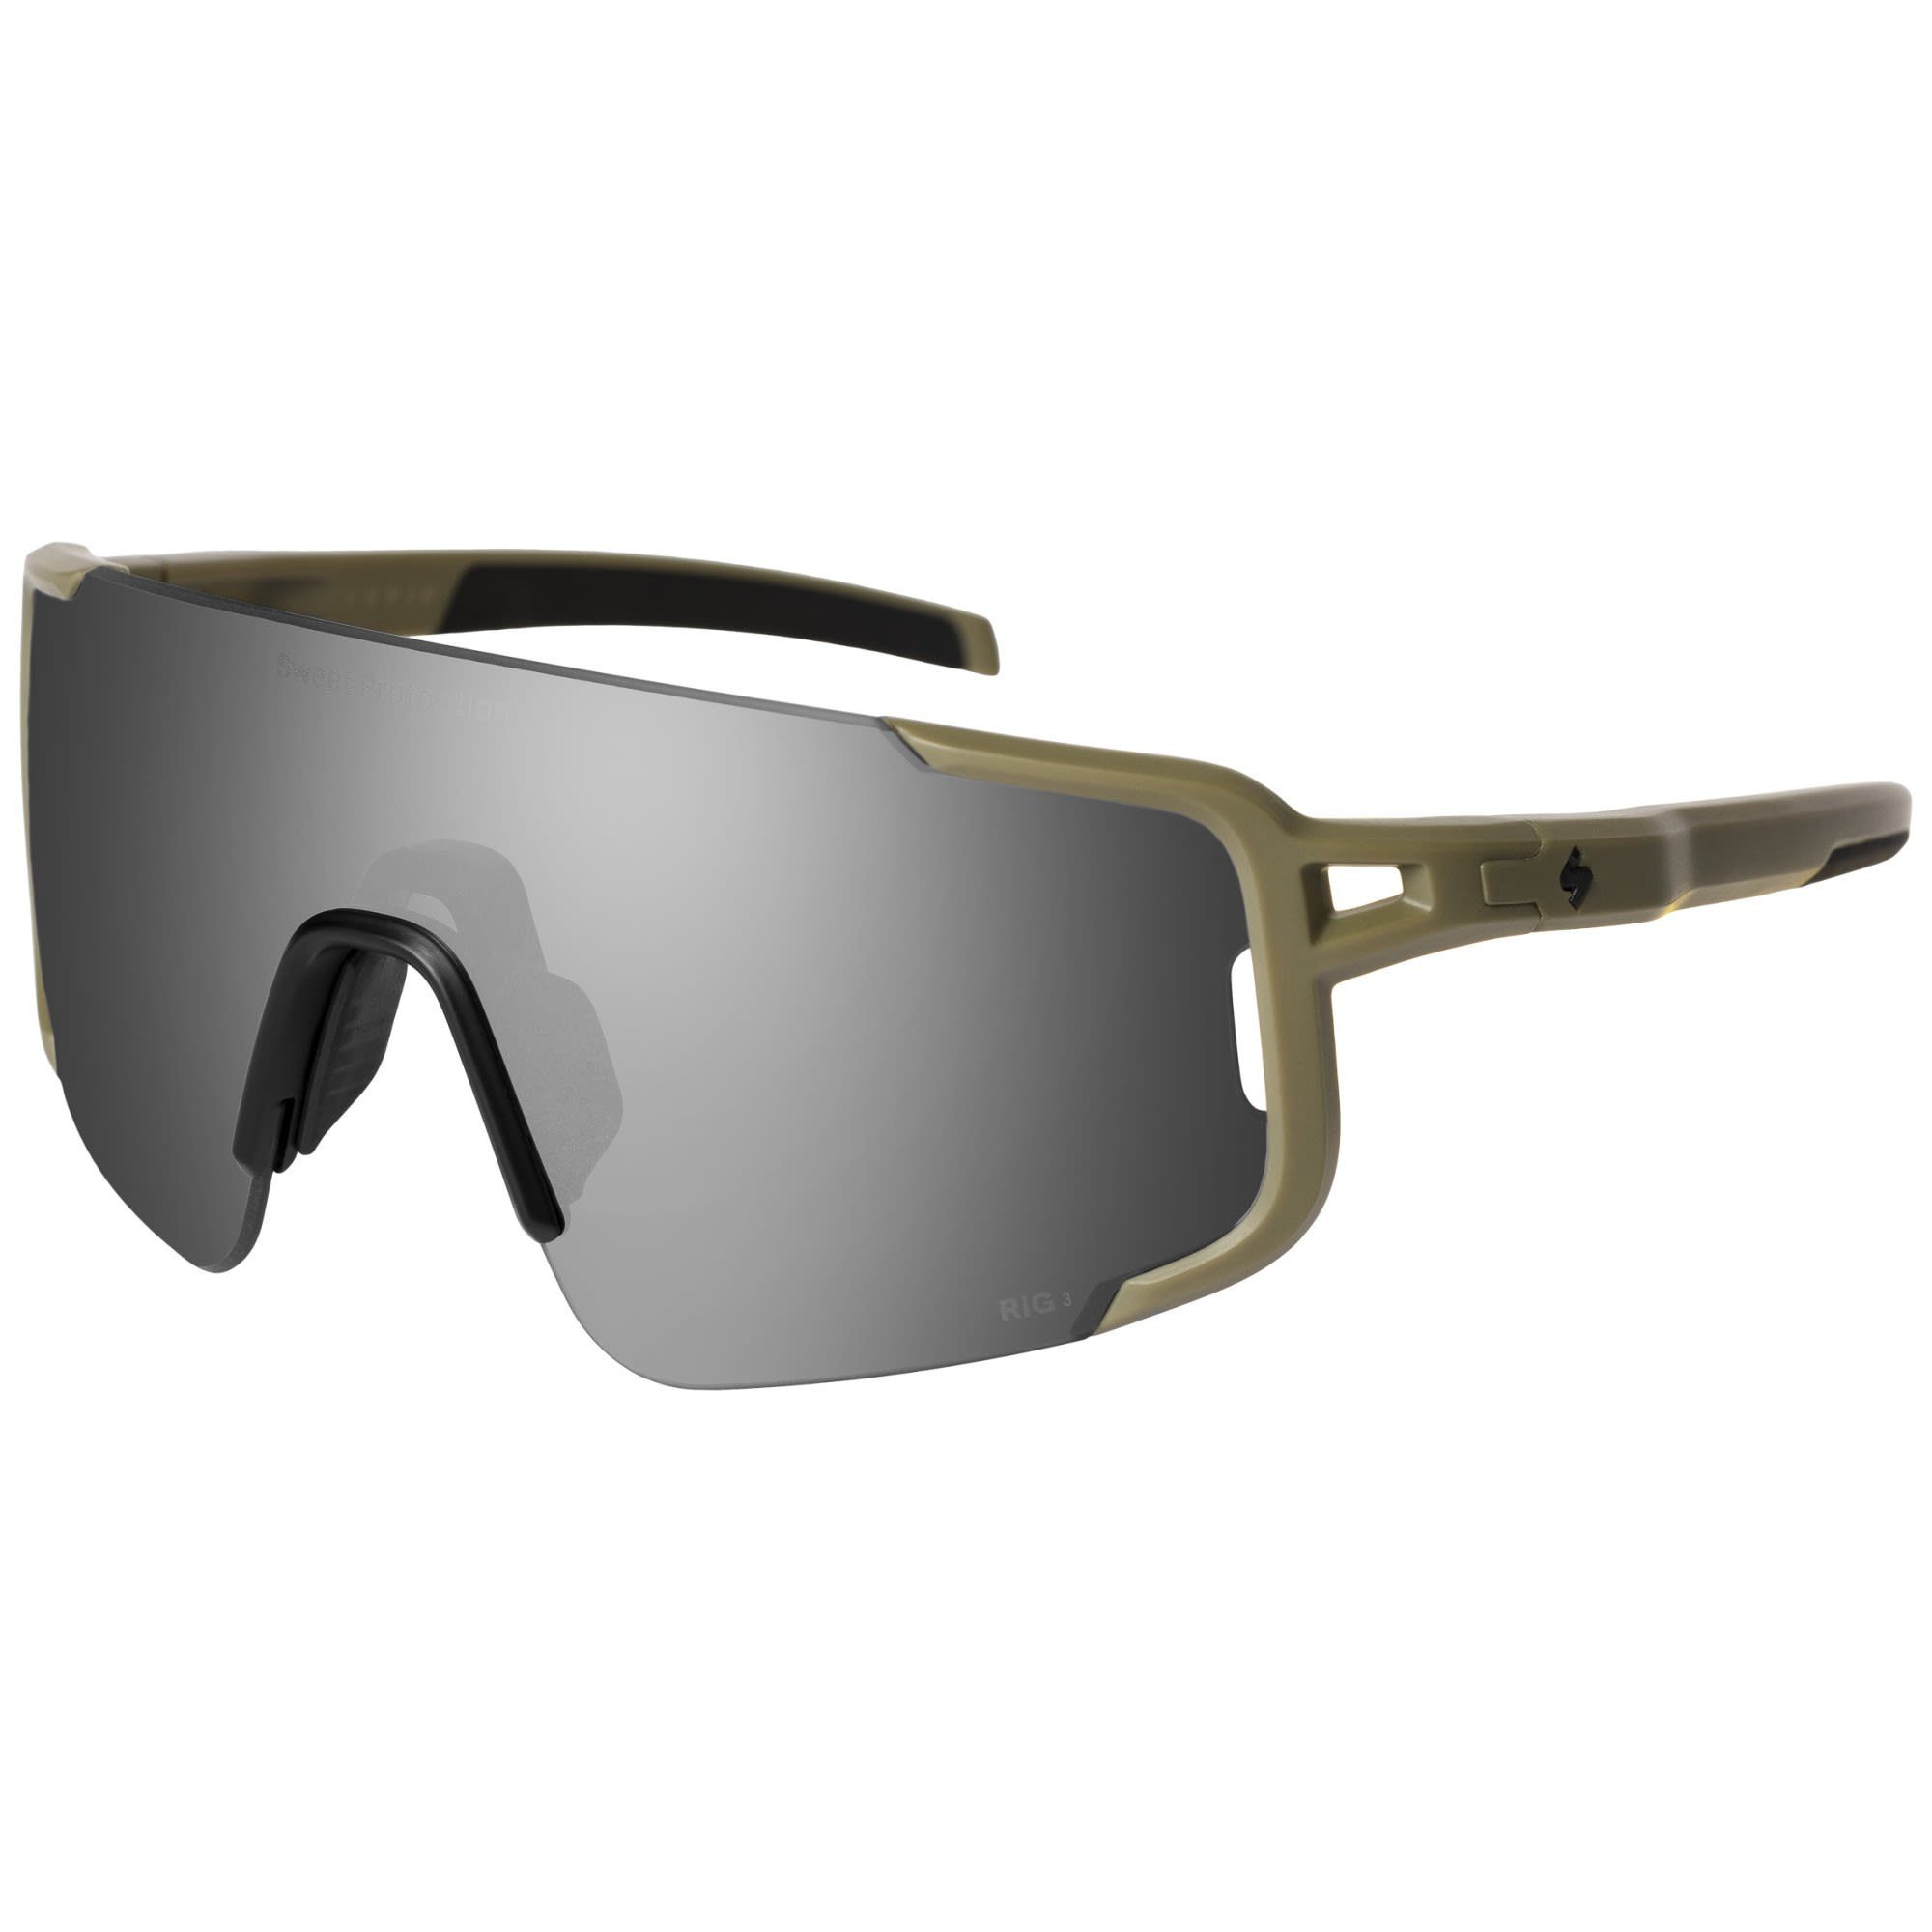 Rig Accessoires Sweet Ronin Sweet Fahrradbrille Woodland - Obsidian Reflect RIG Protection Protection